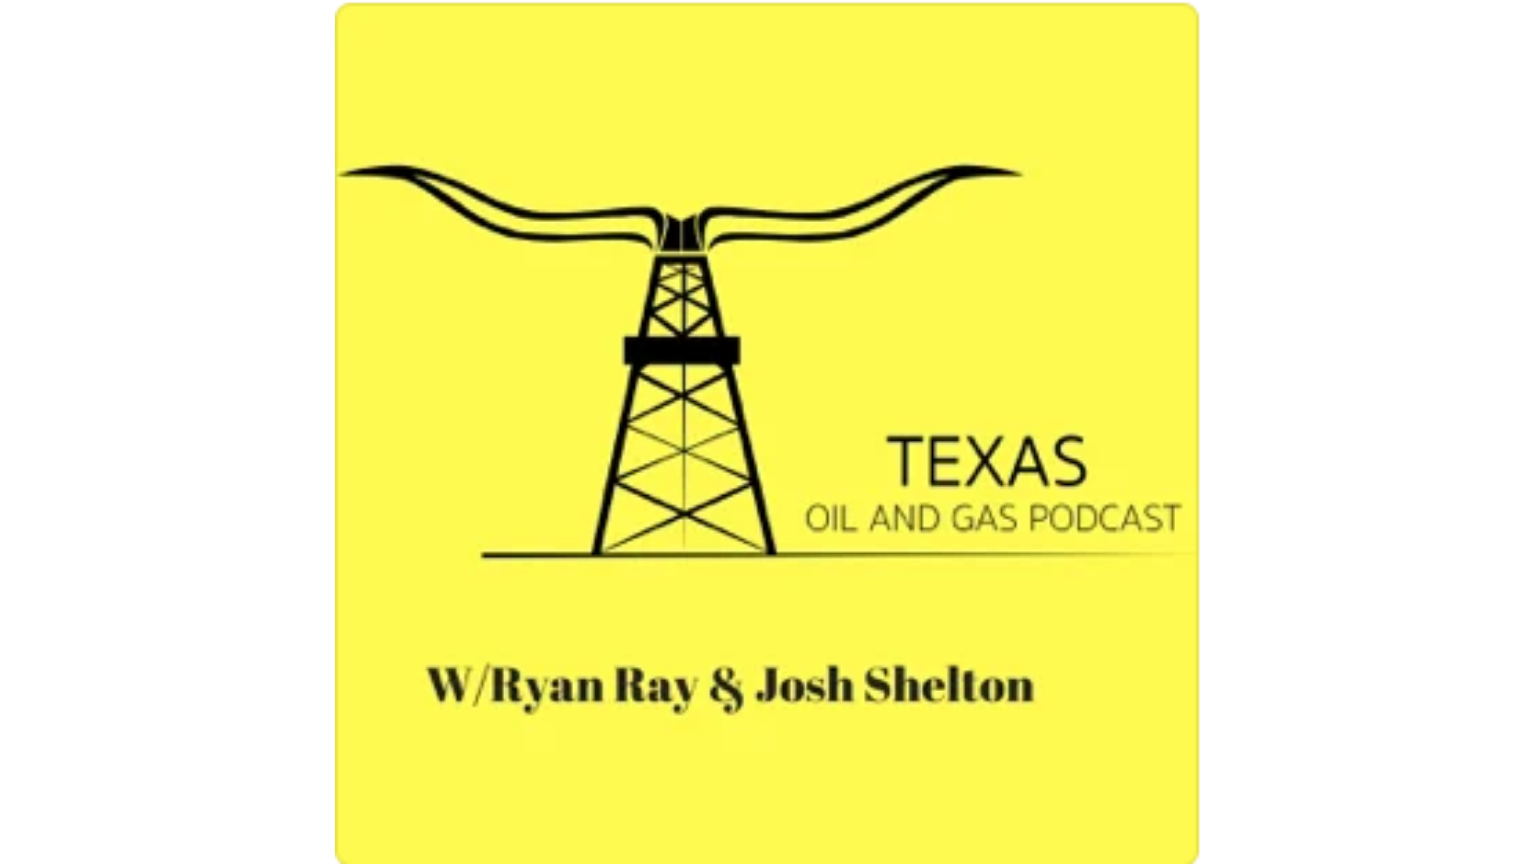 Texas Oil and Gas Podcast